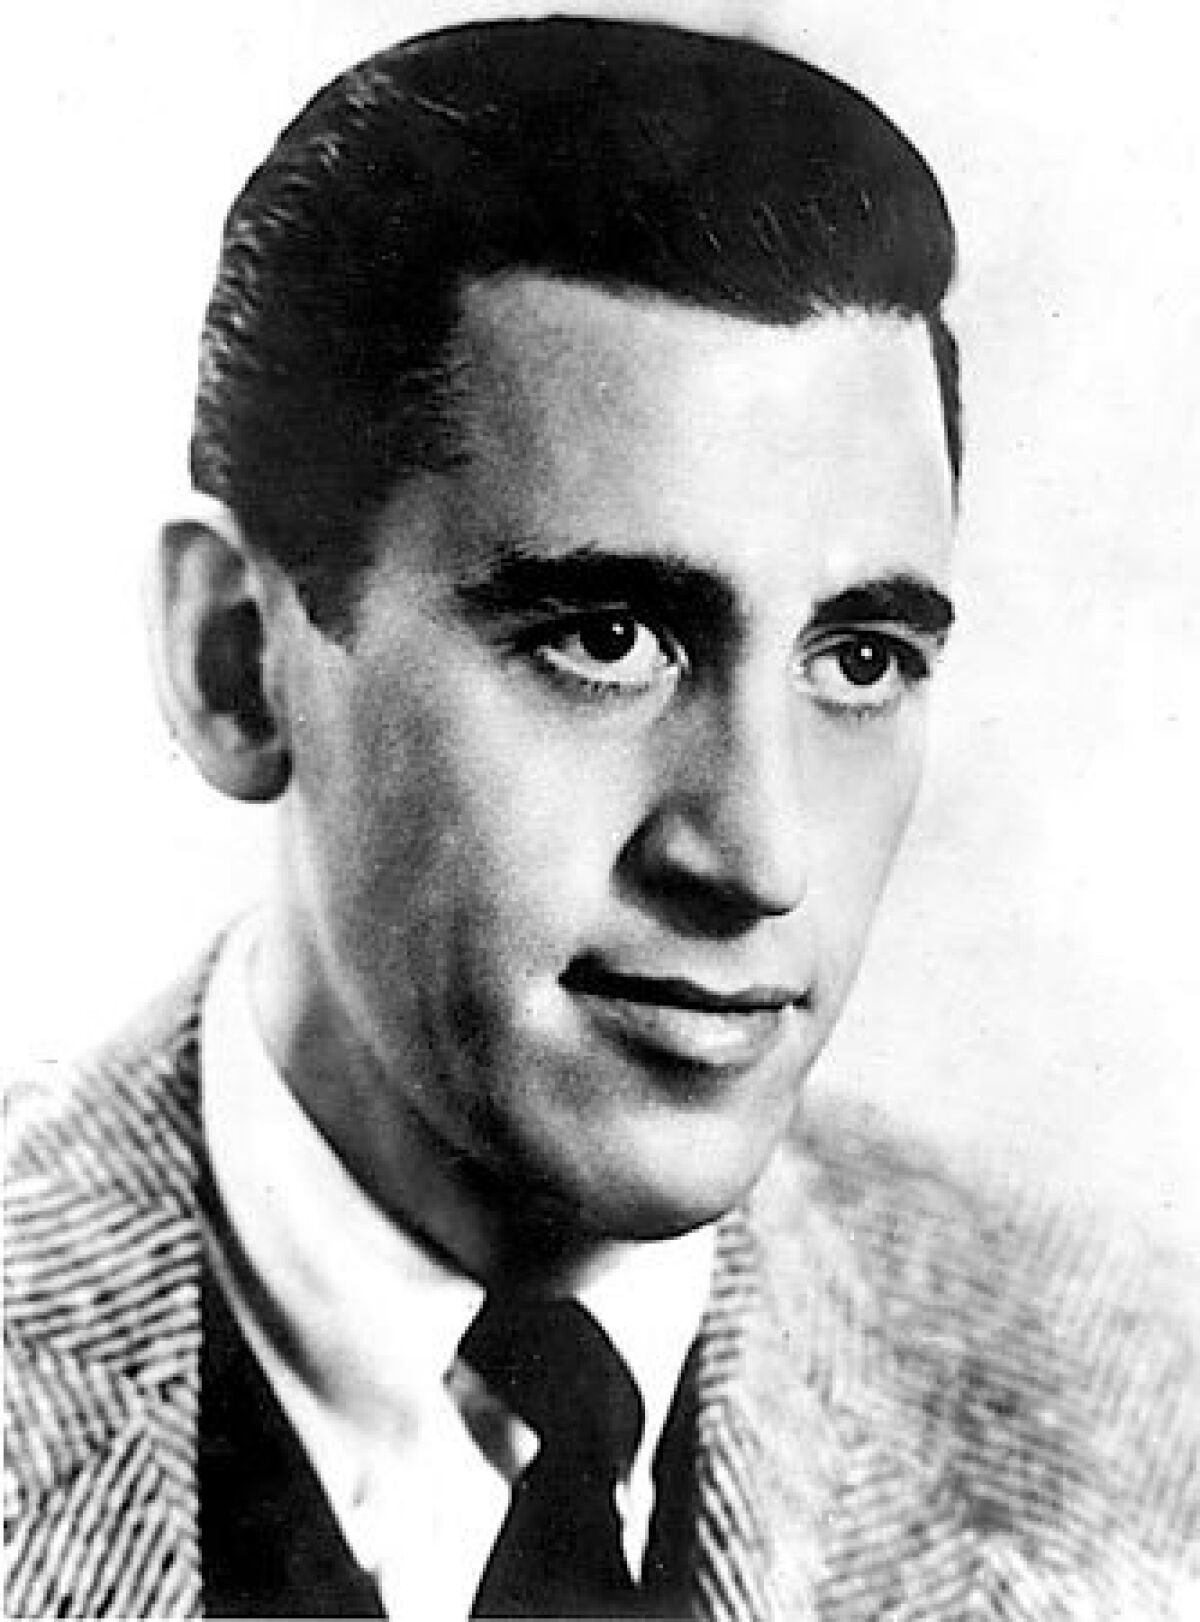 American novelist and short-story writer J.D. Salinger. The new documentary "Salinger" looks into the life of the mysterious author.